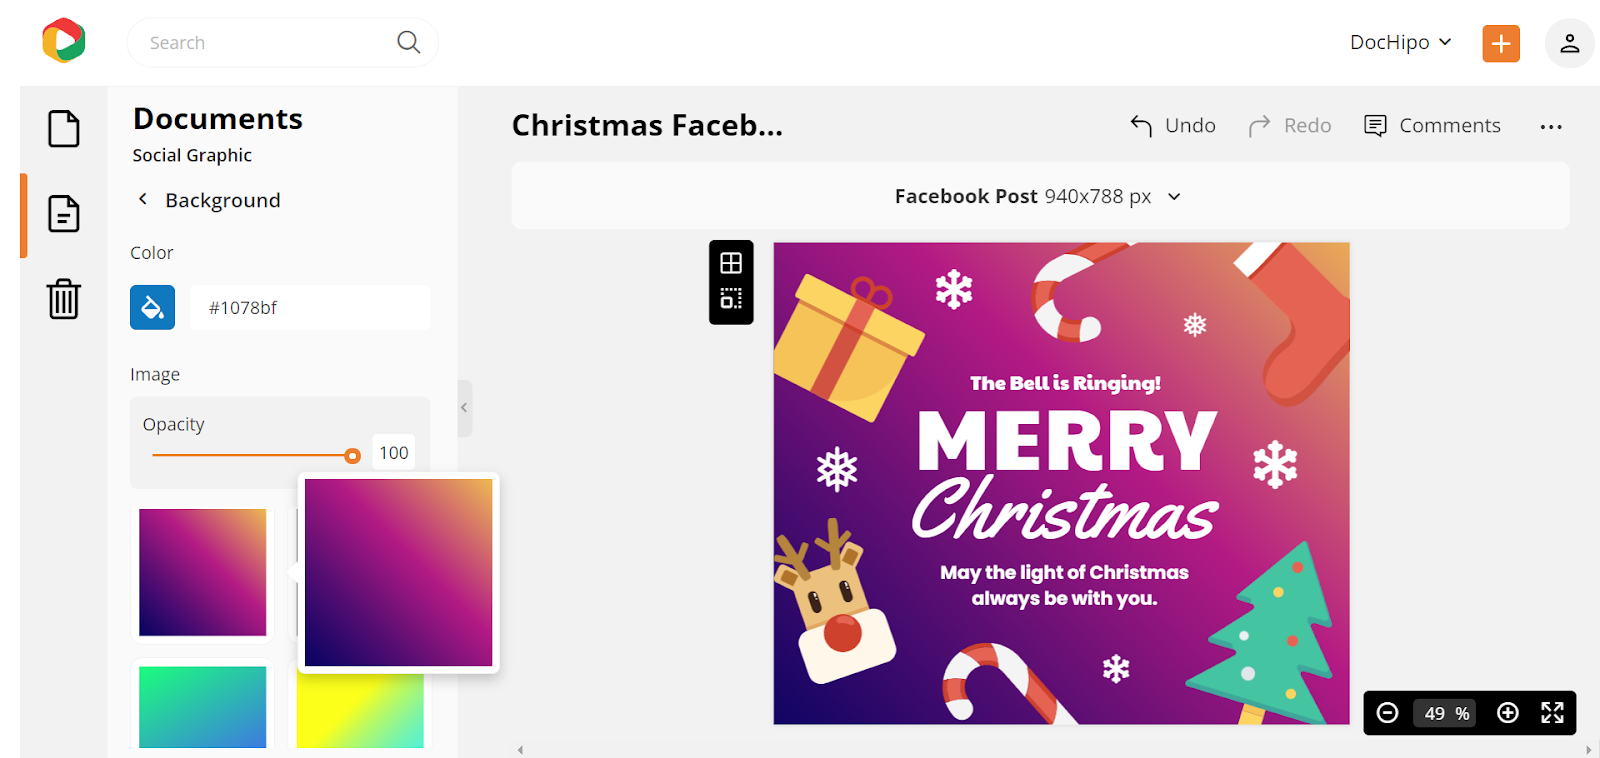 Change Background Color of Christmas Facebook Post Template